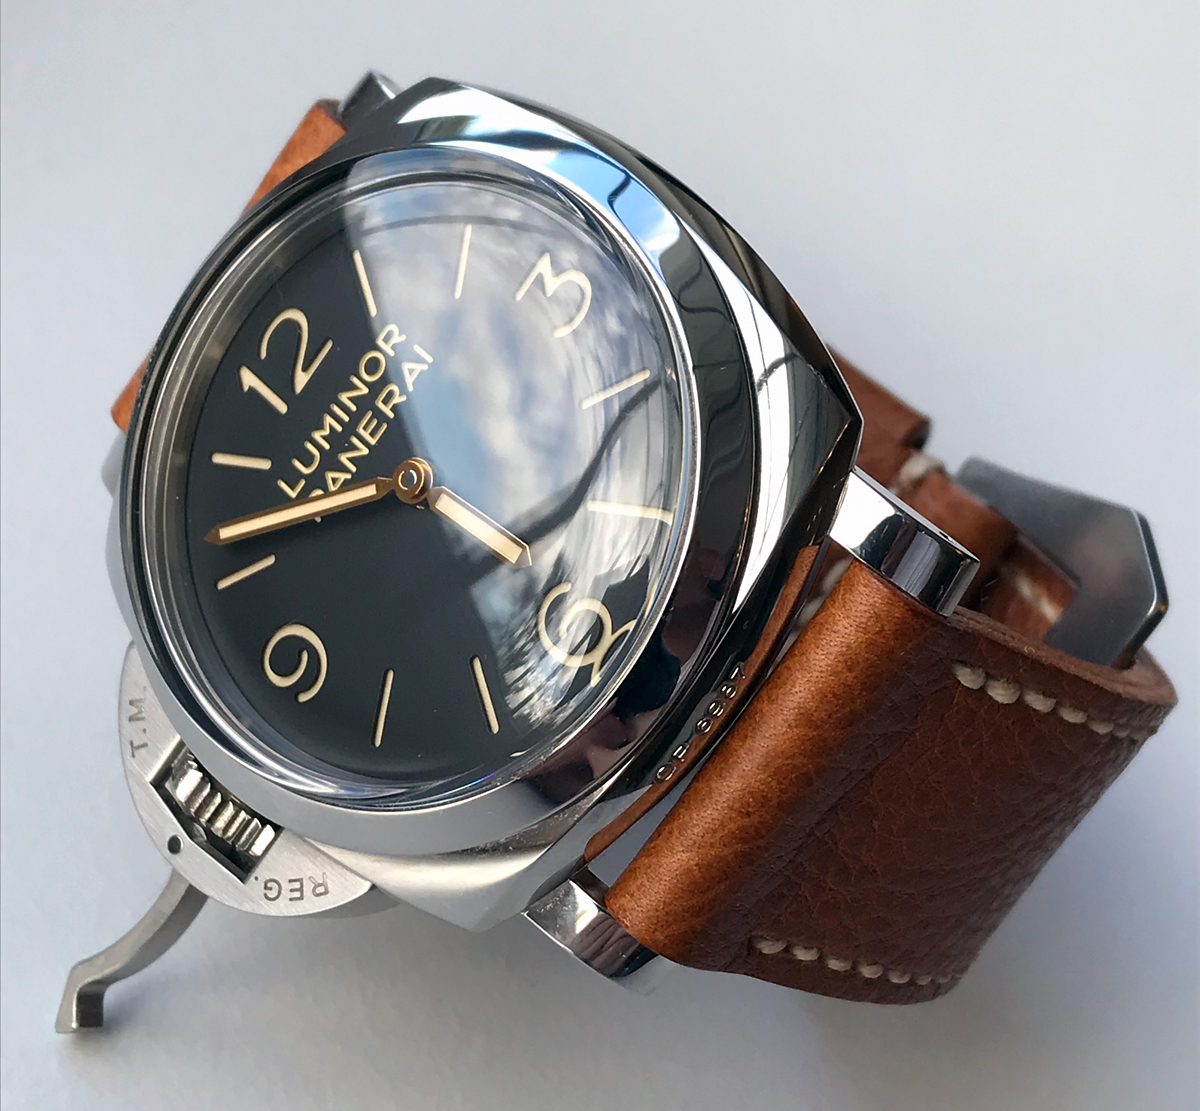 Panerai 557 on Whisky leather with natural stitching. © Terry Wright